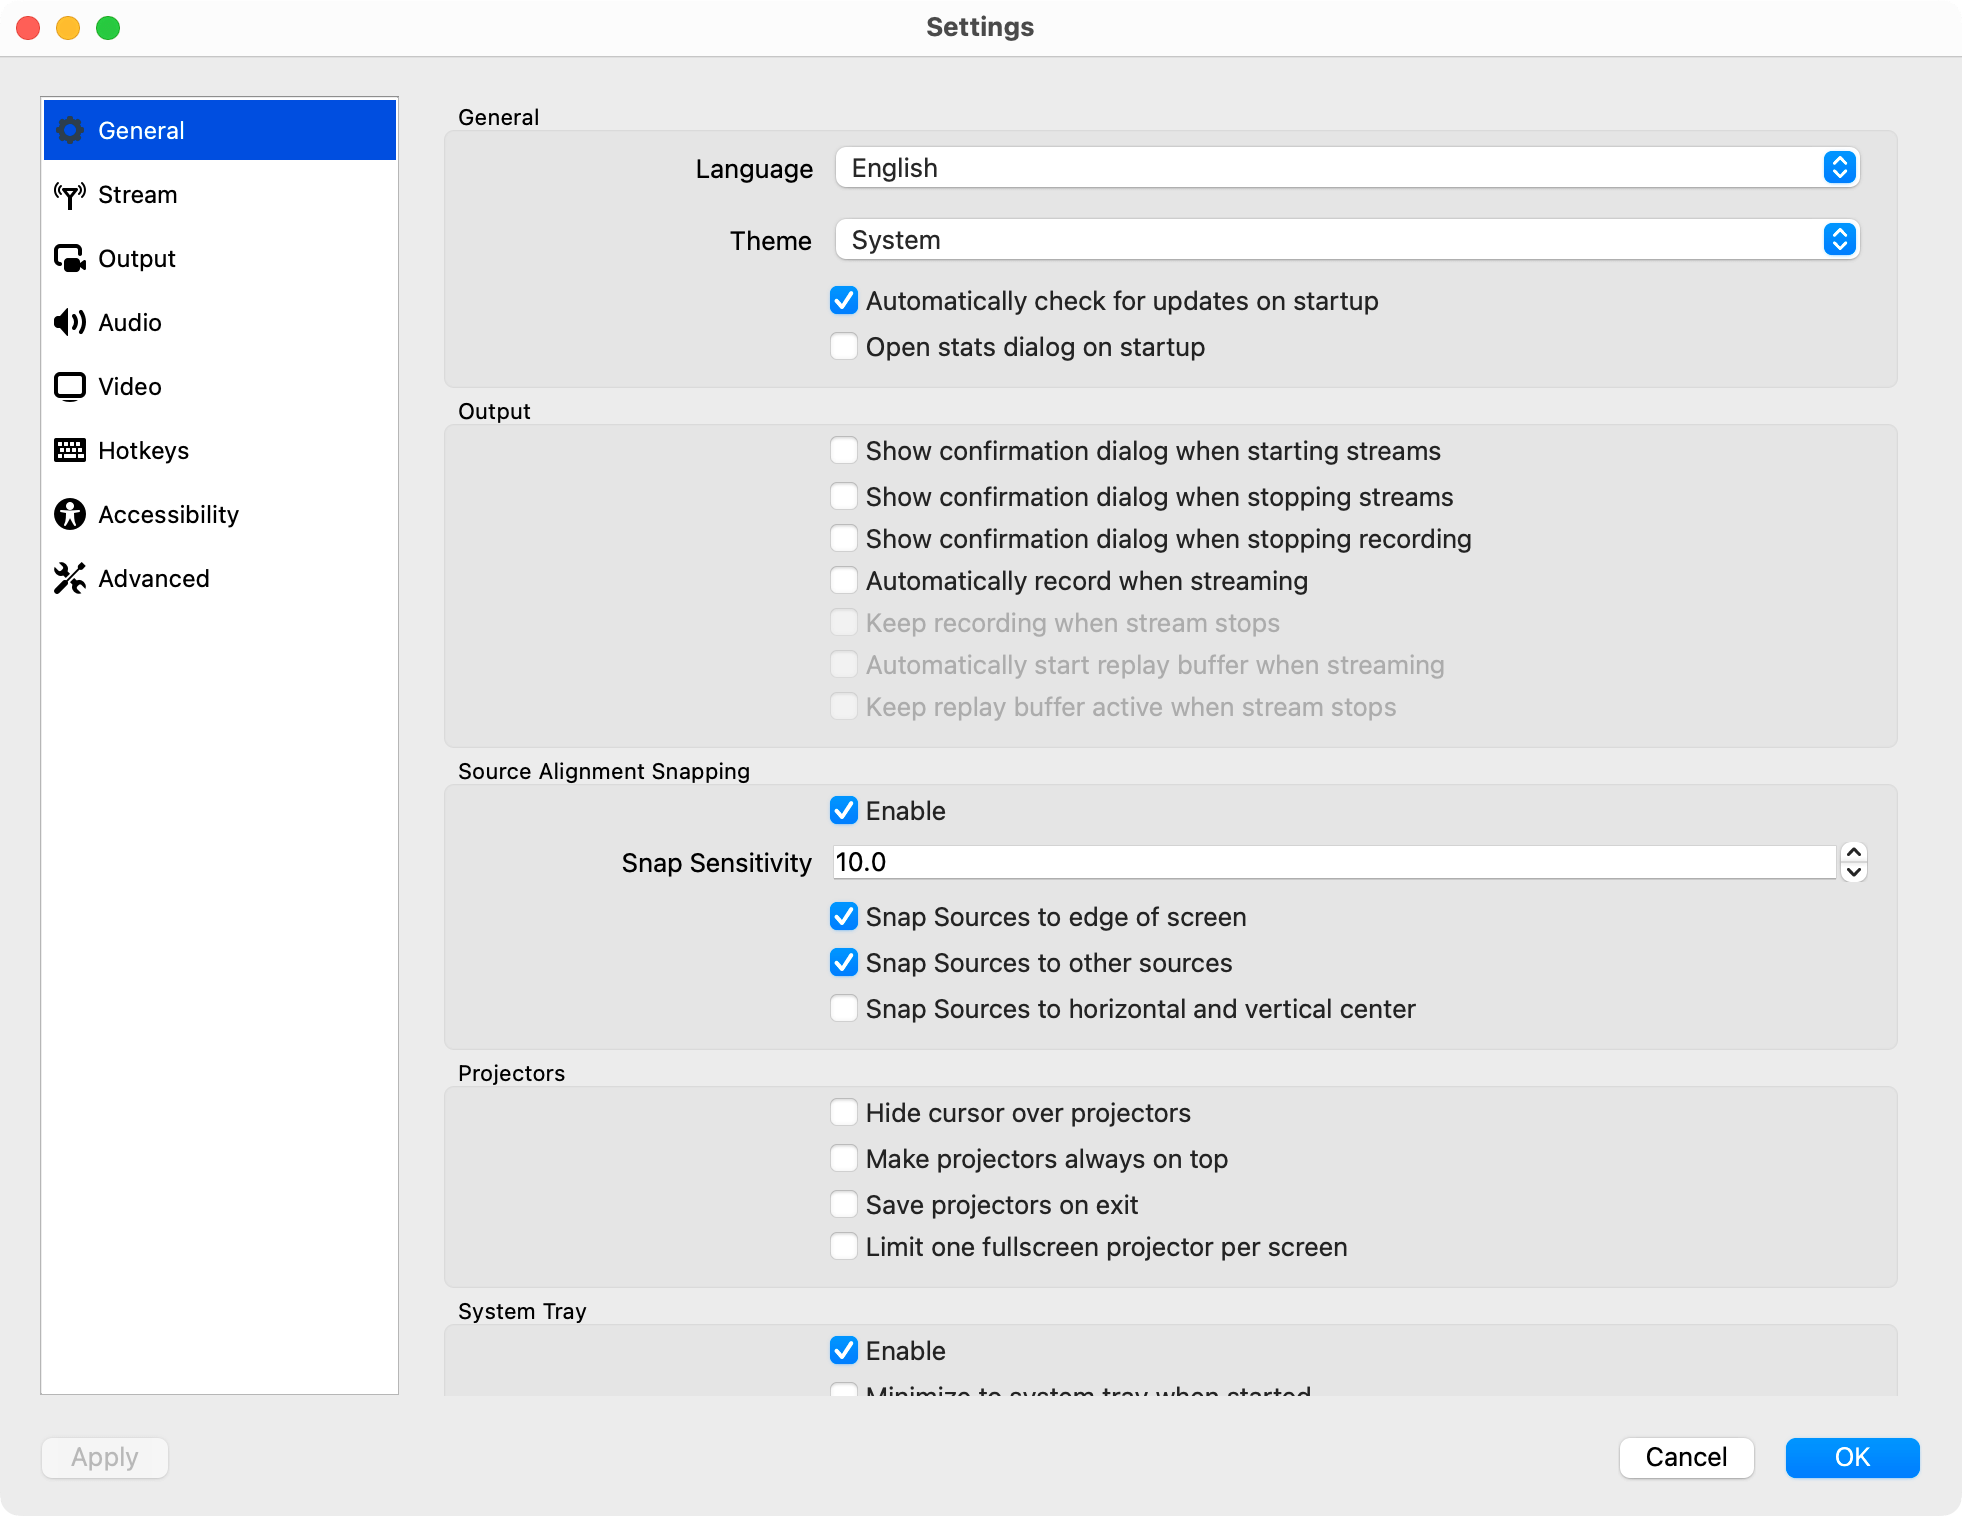 OBS Studio's settings window showing the System theme on macOS